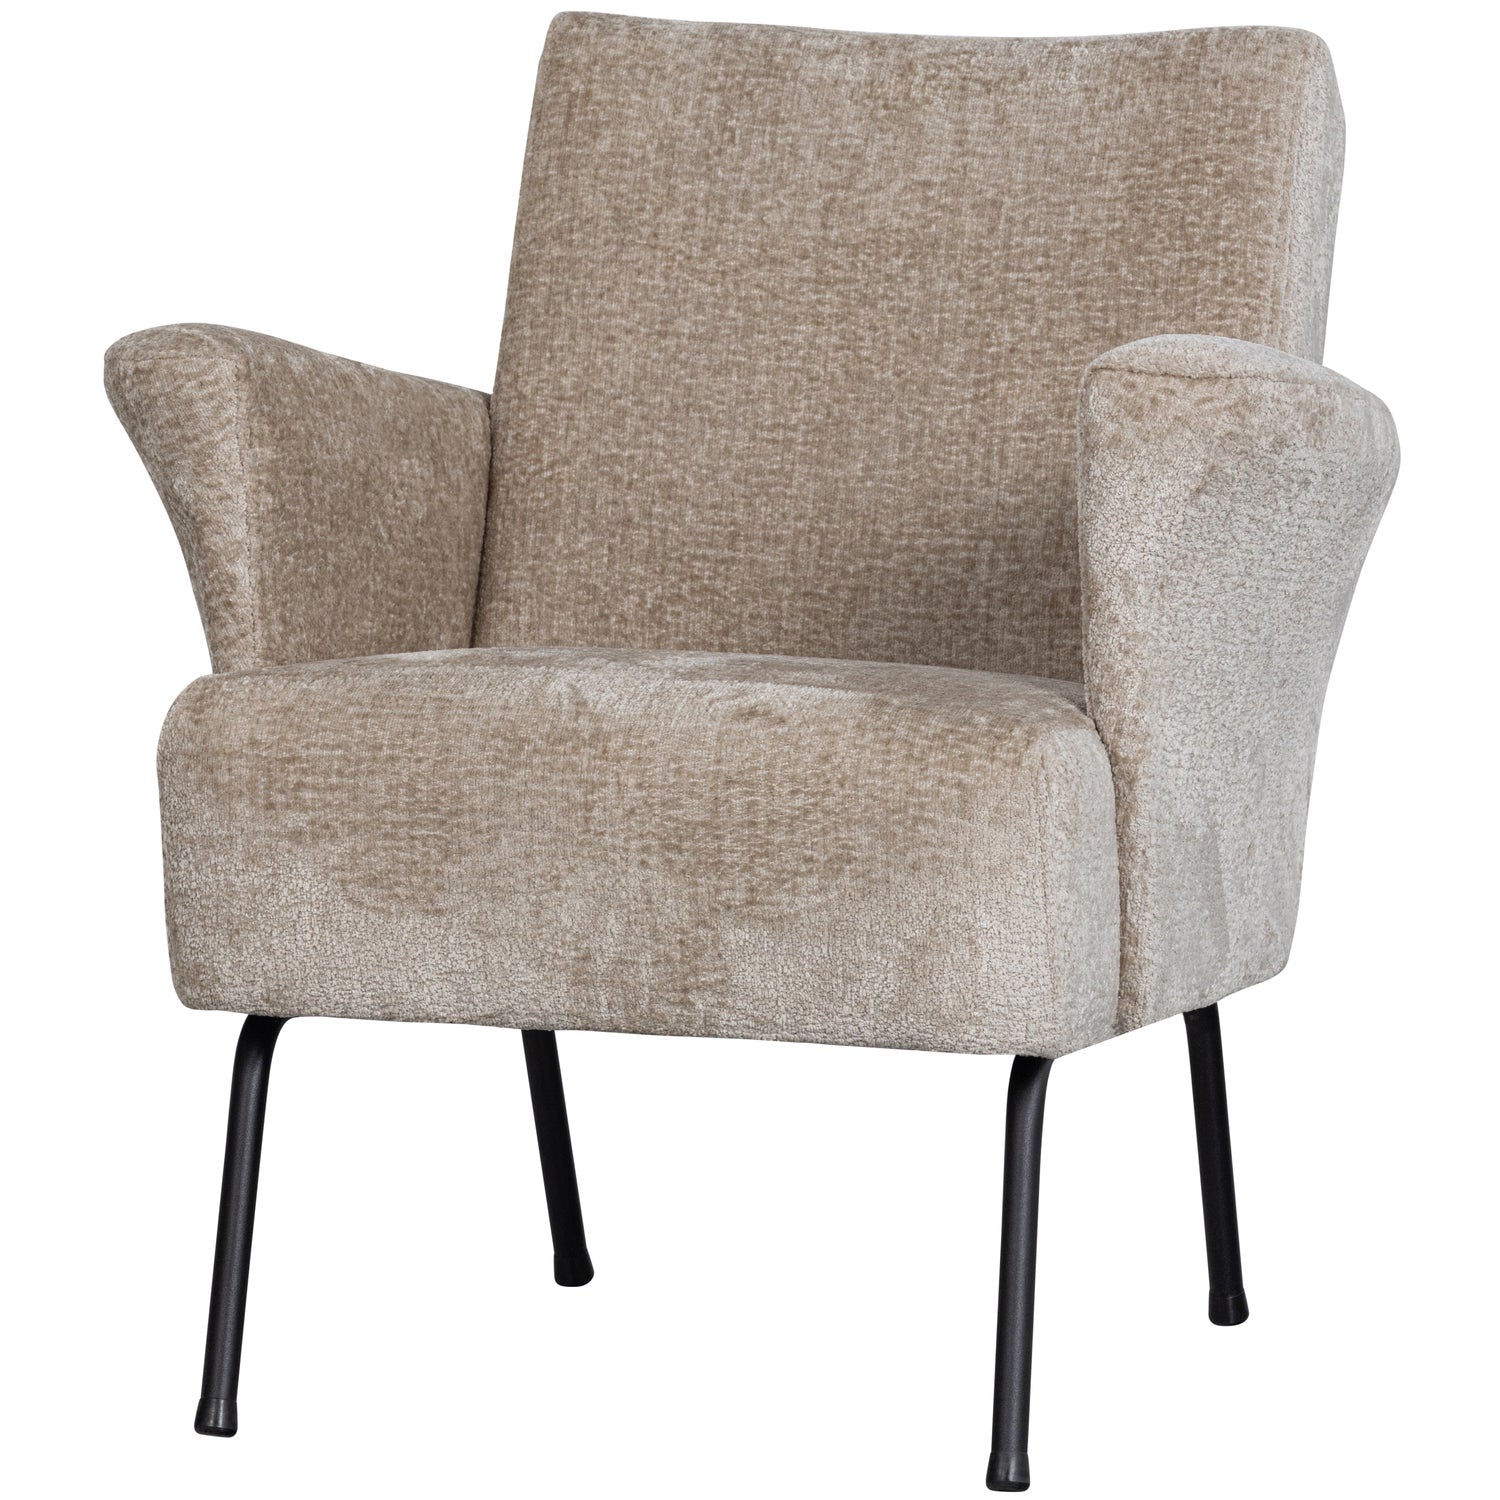 MUSE ARMCHAIR COARSE WOVEN FABRIC NATURAL